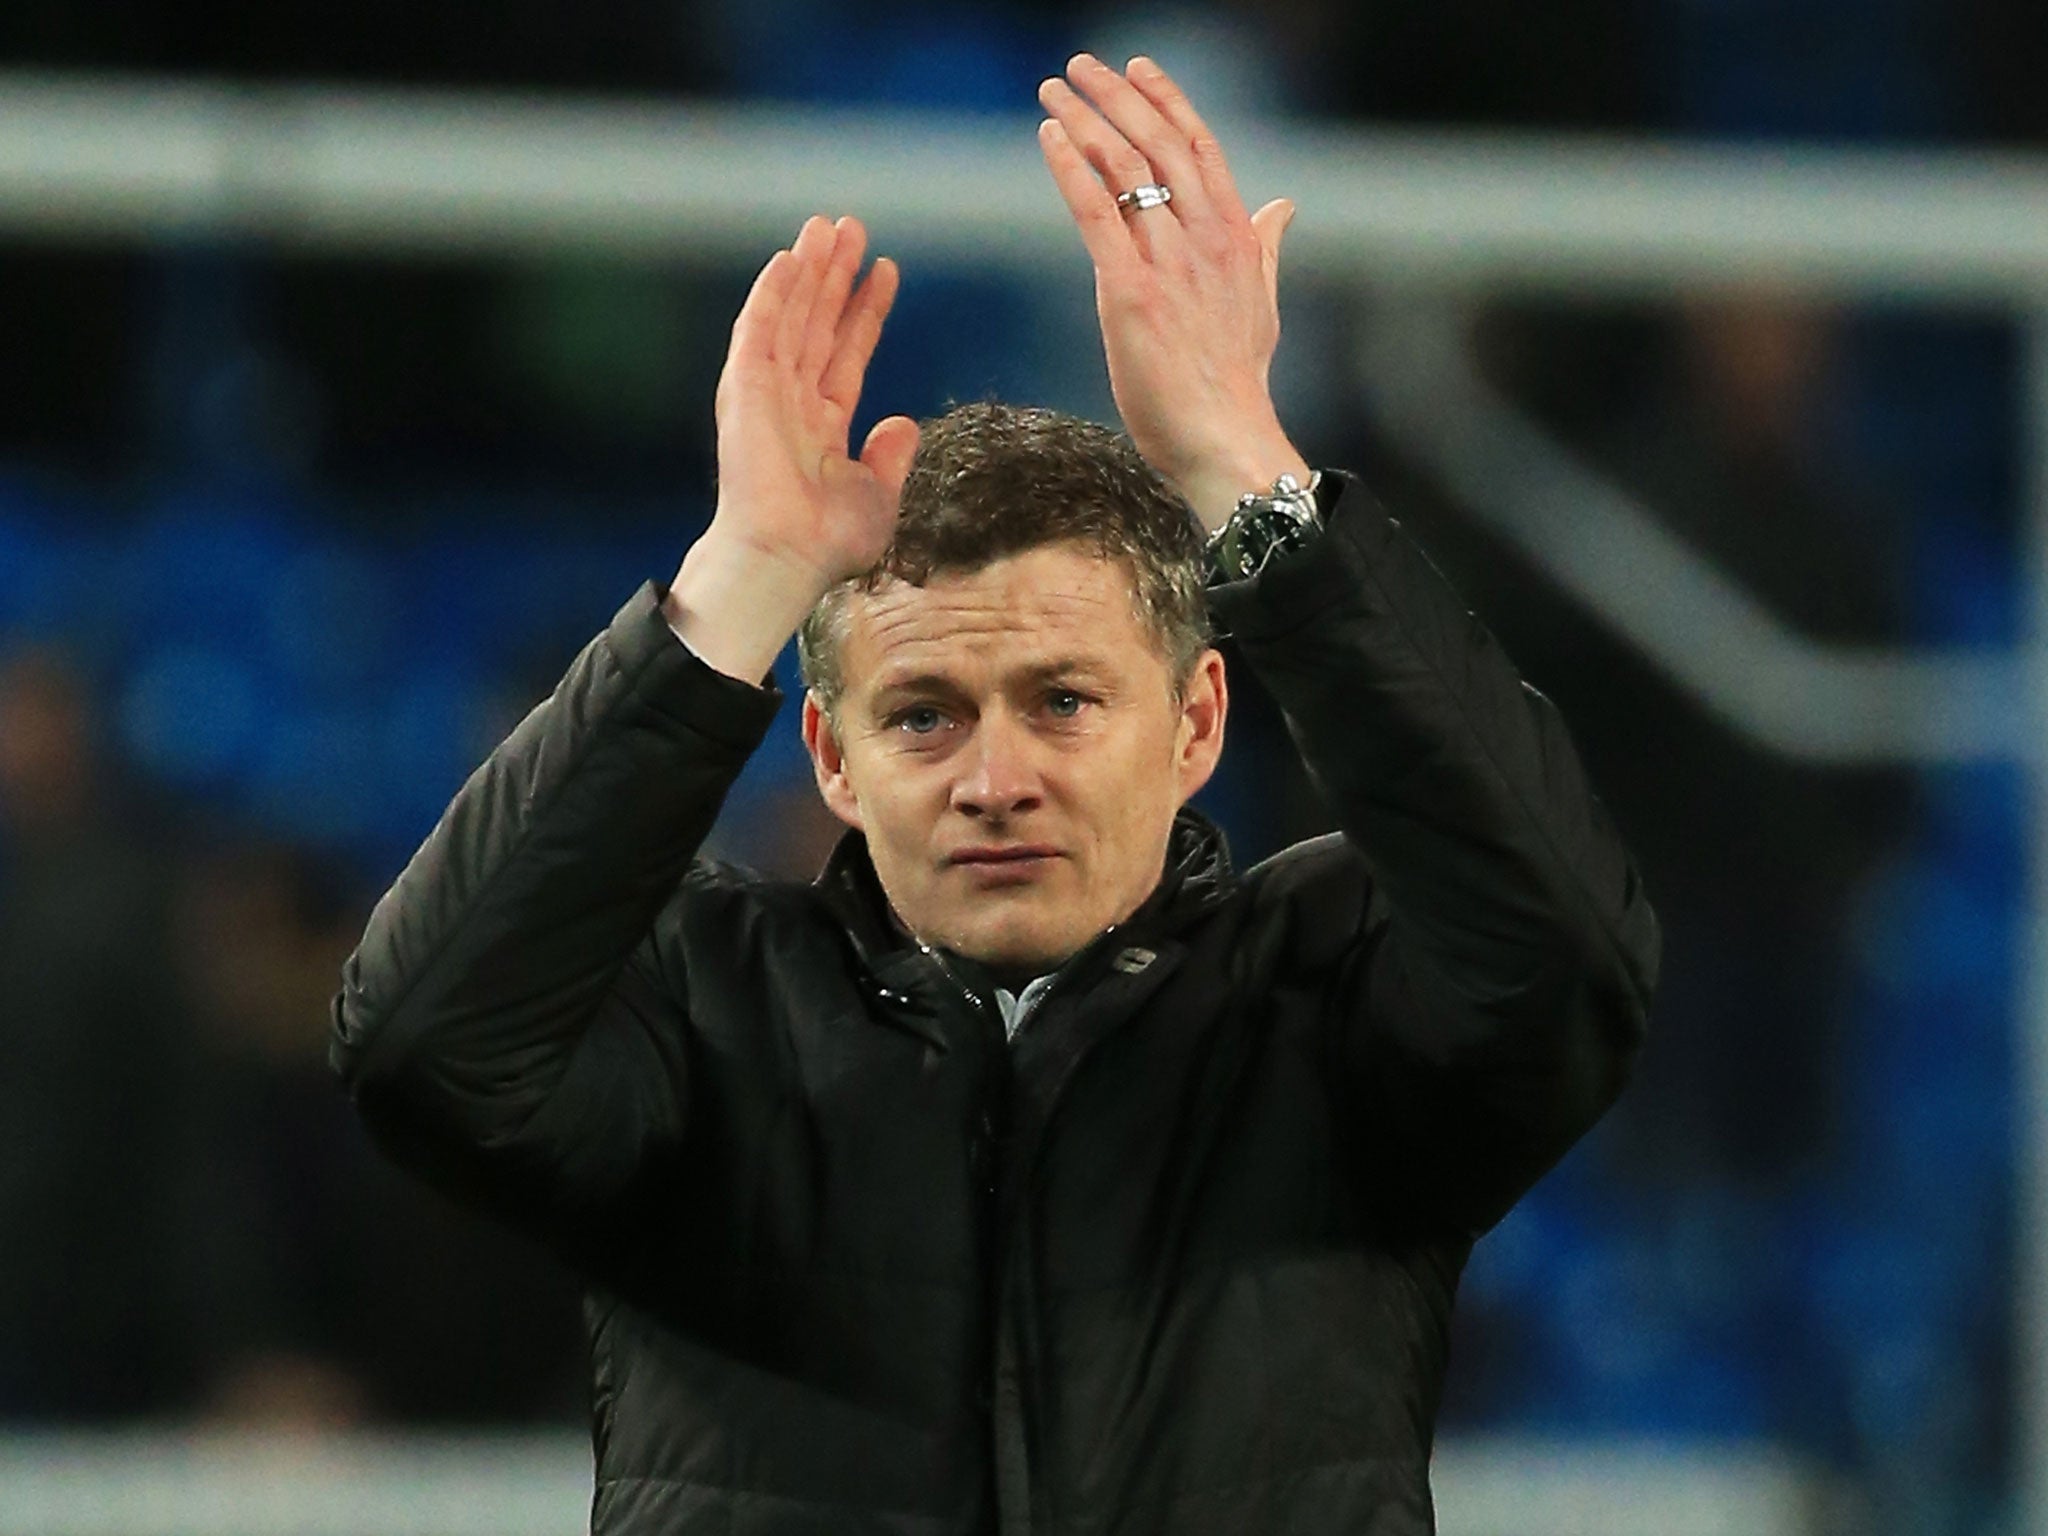 Cardiff manager Ole Gunnar Solskjaer applauds the fans